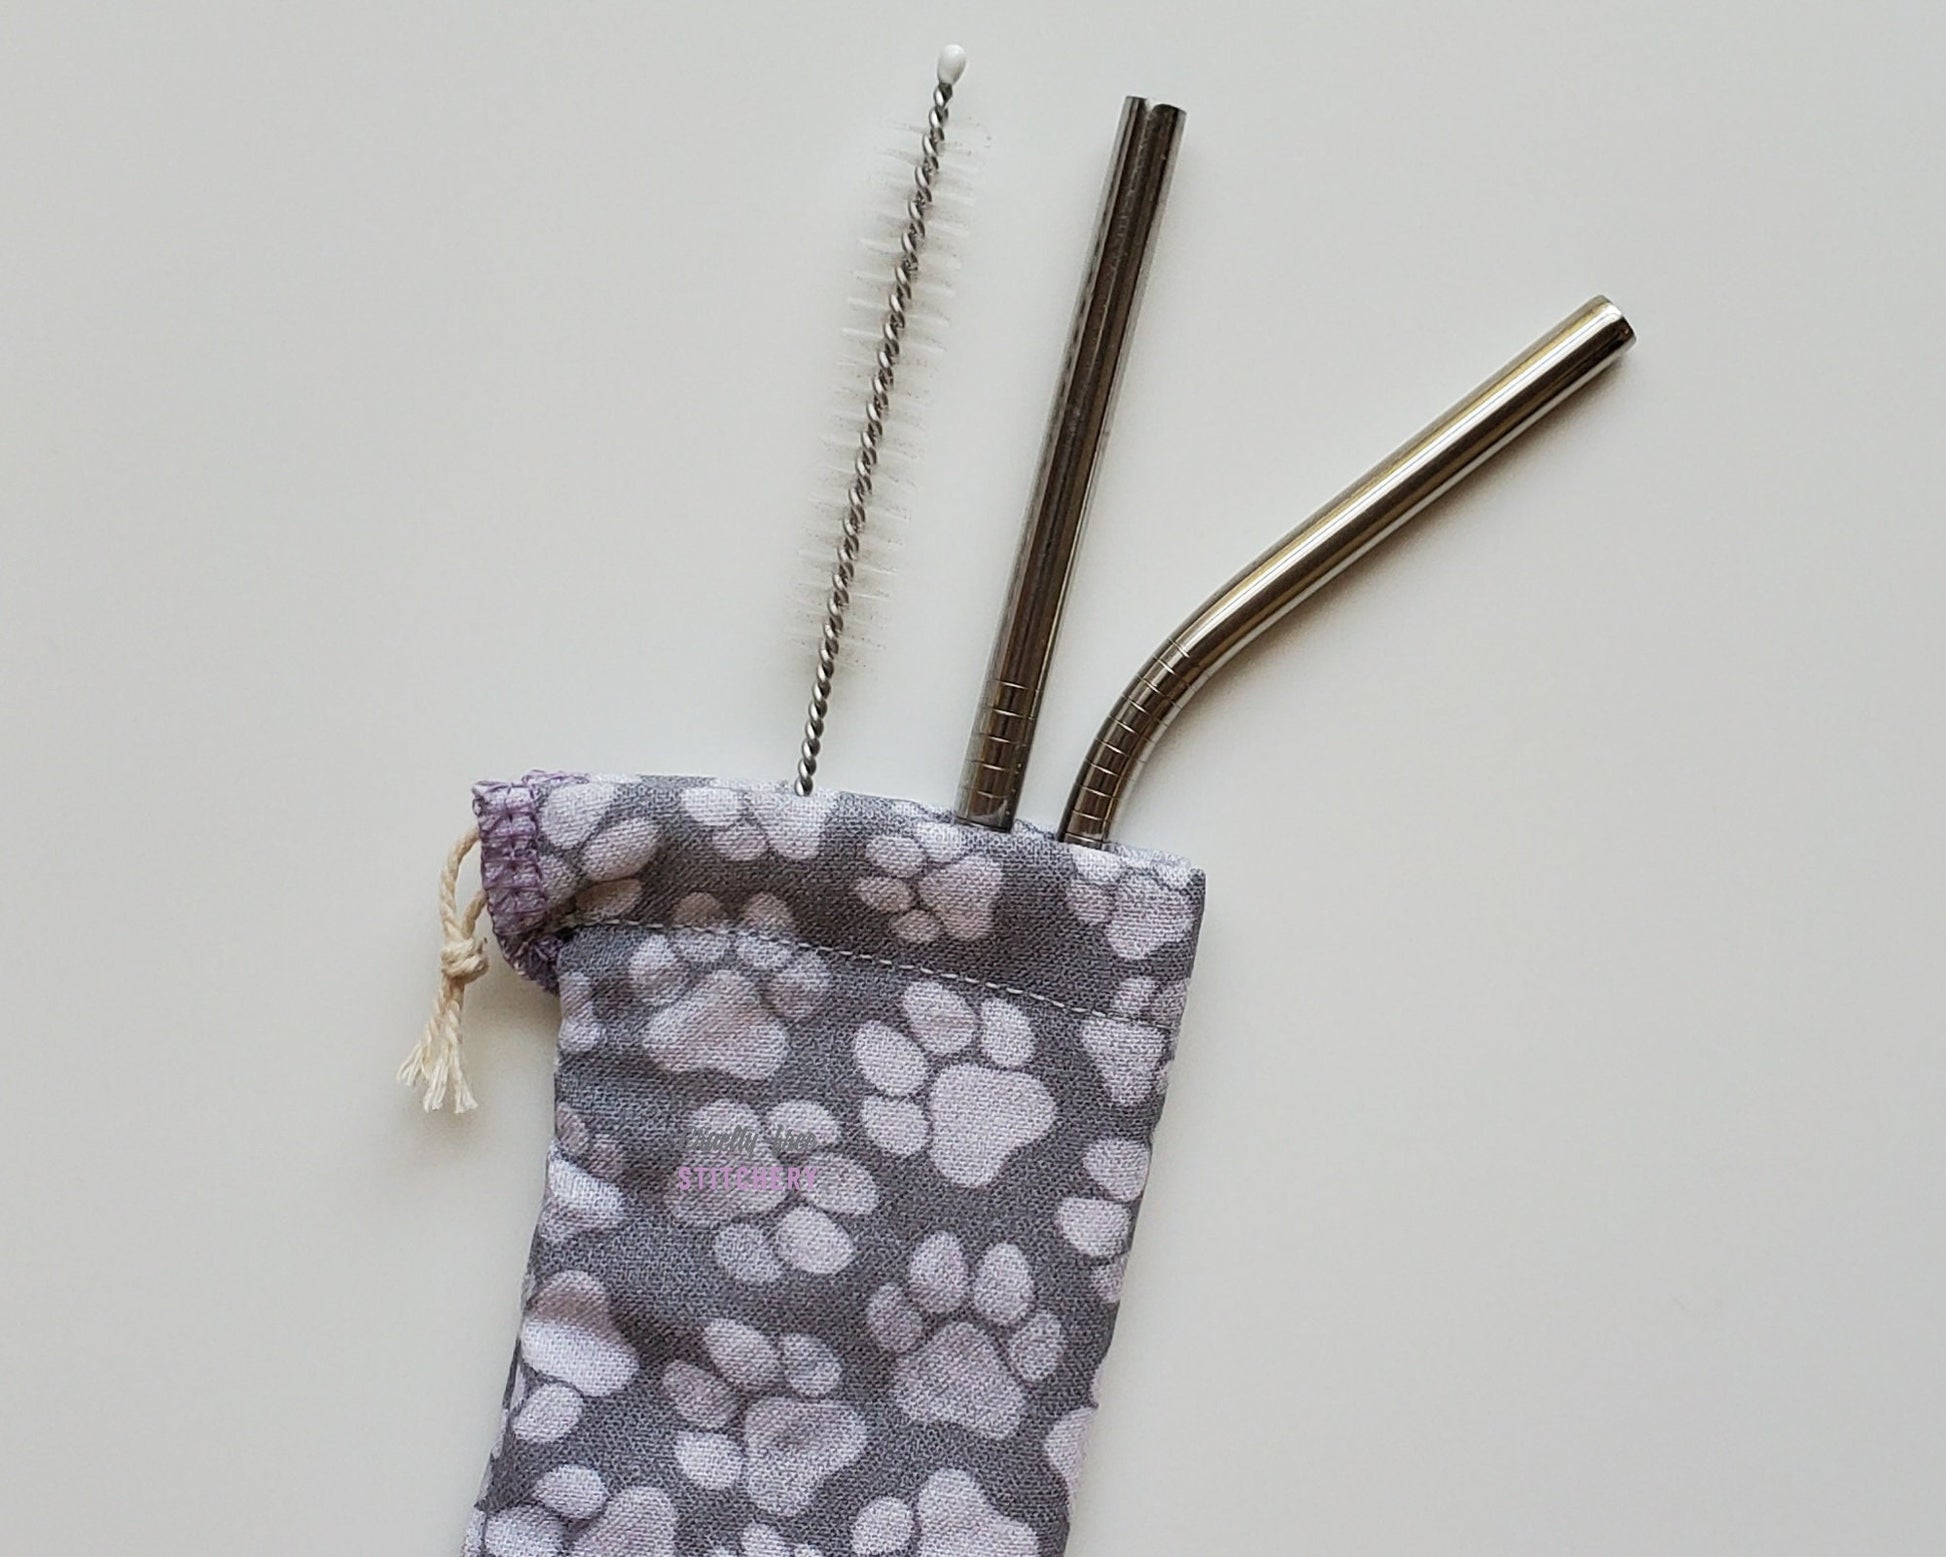 Reusable straw pouch with stainless steel straws sticking out the top. The fabric of the pouch is grey with various sizes of faded white paw prints, and it has a drawstring closure.